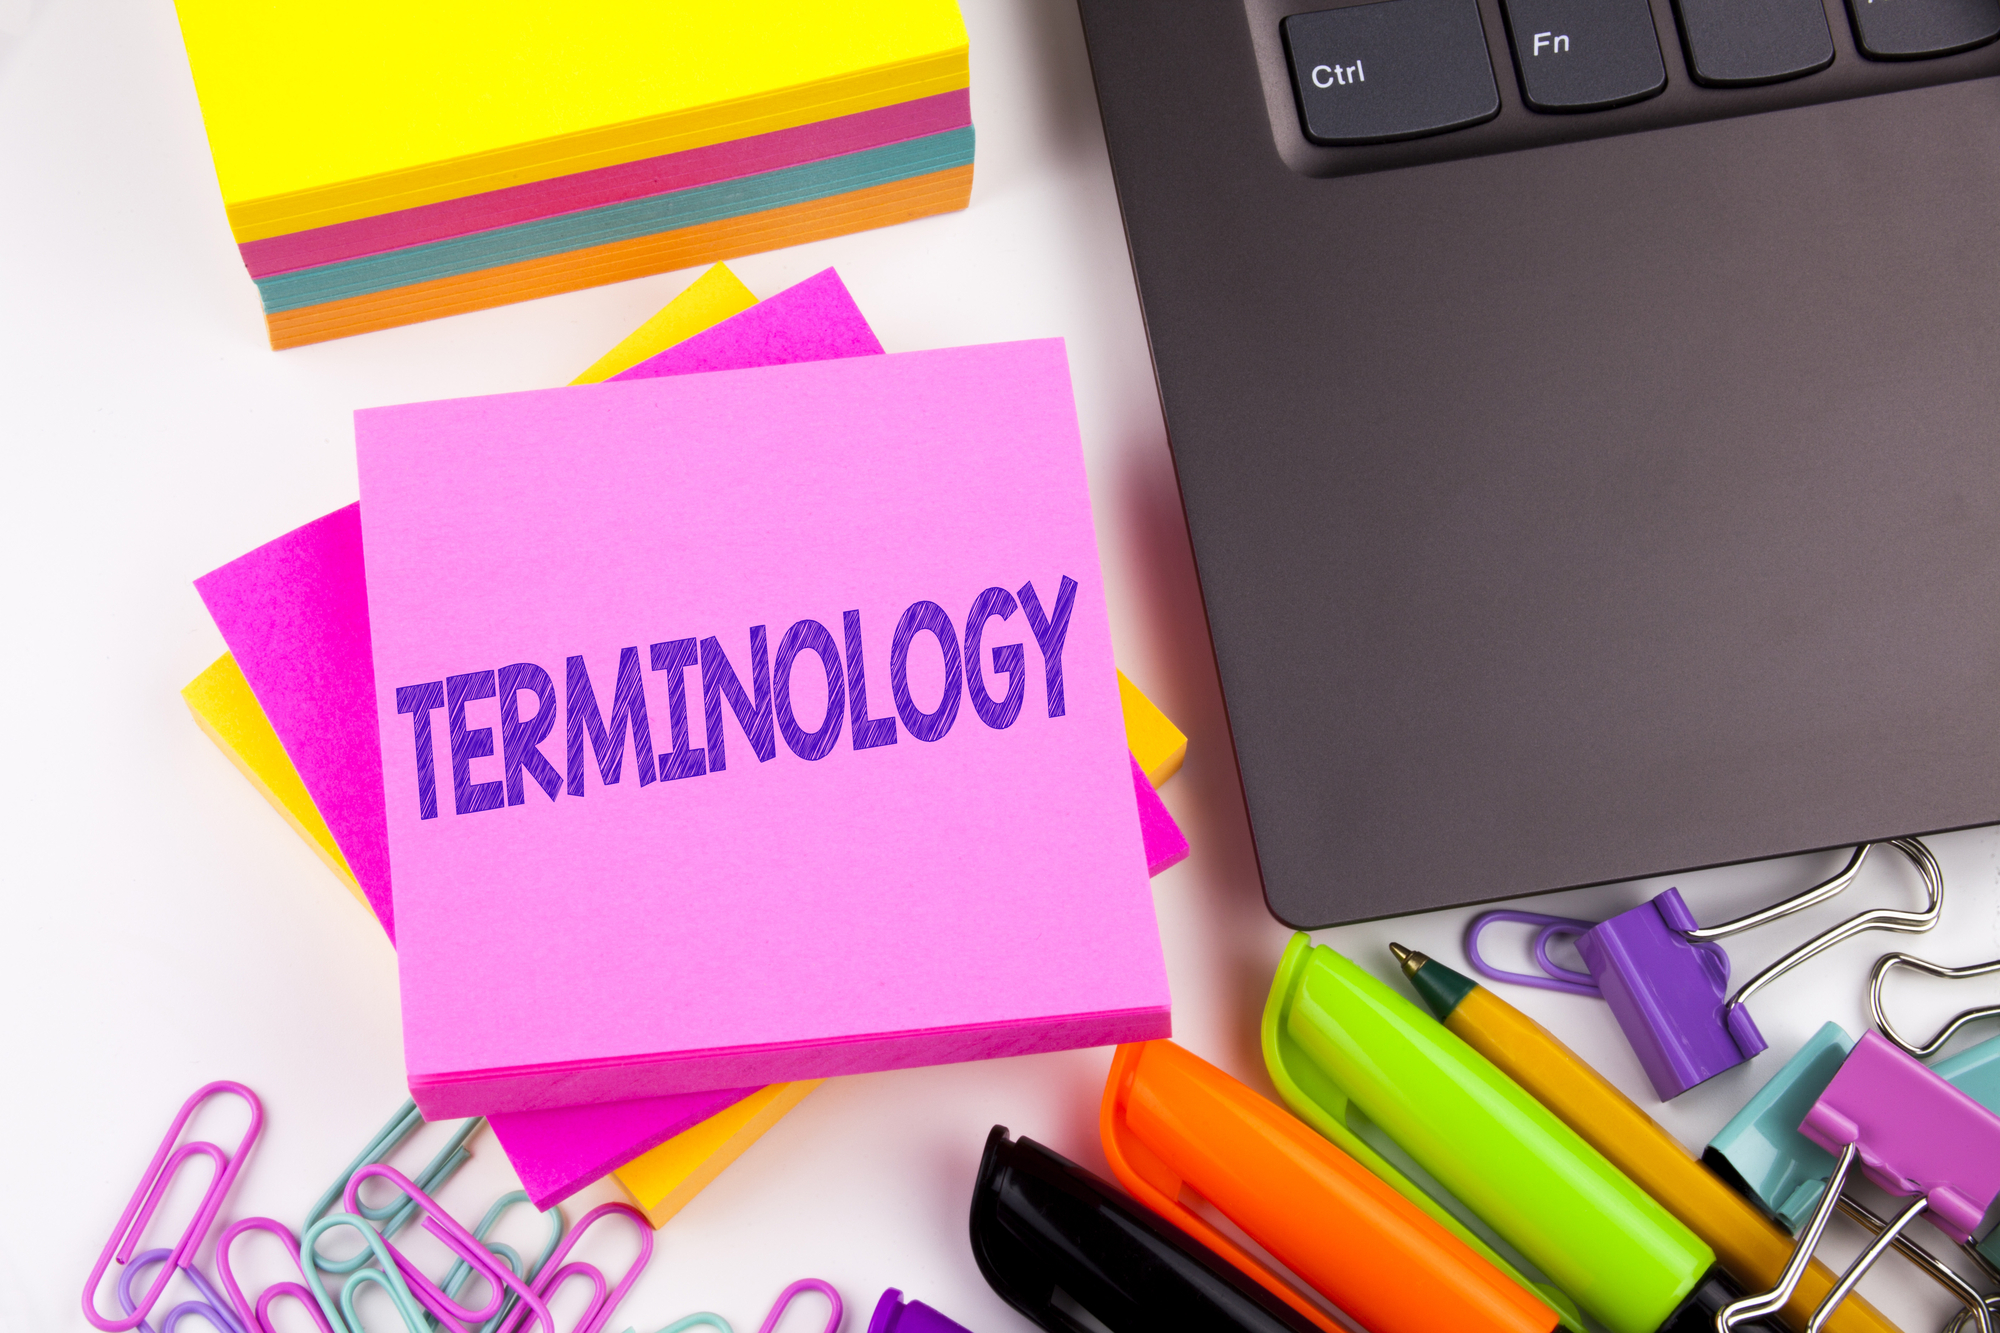 Terminology in the Workplace